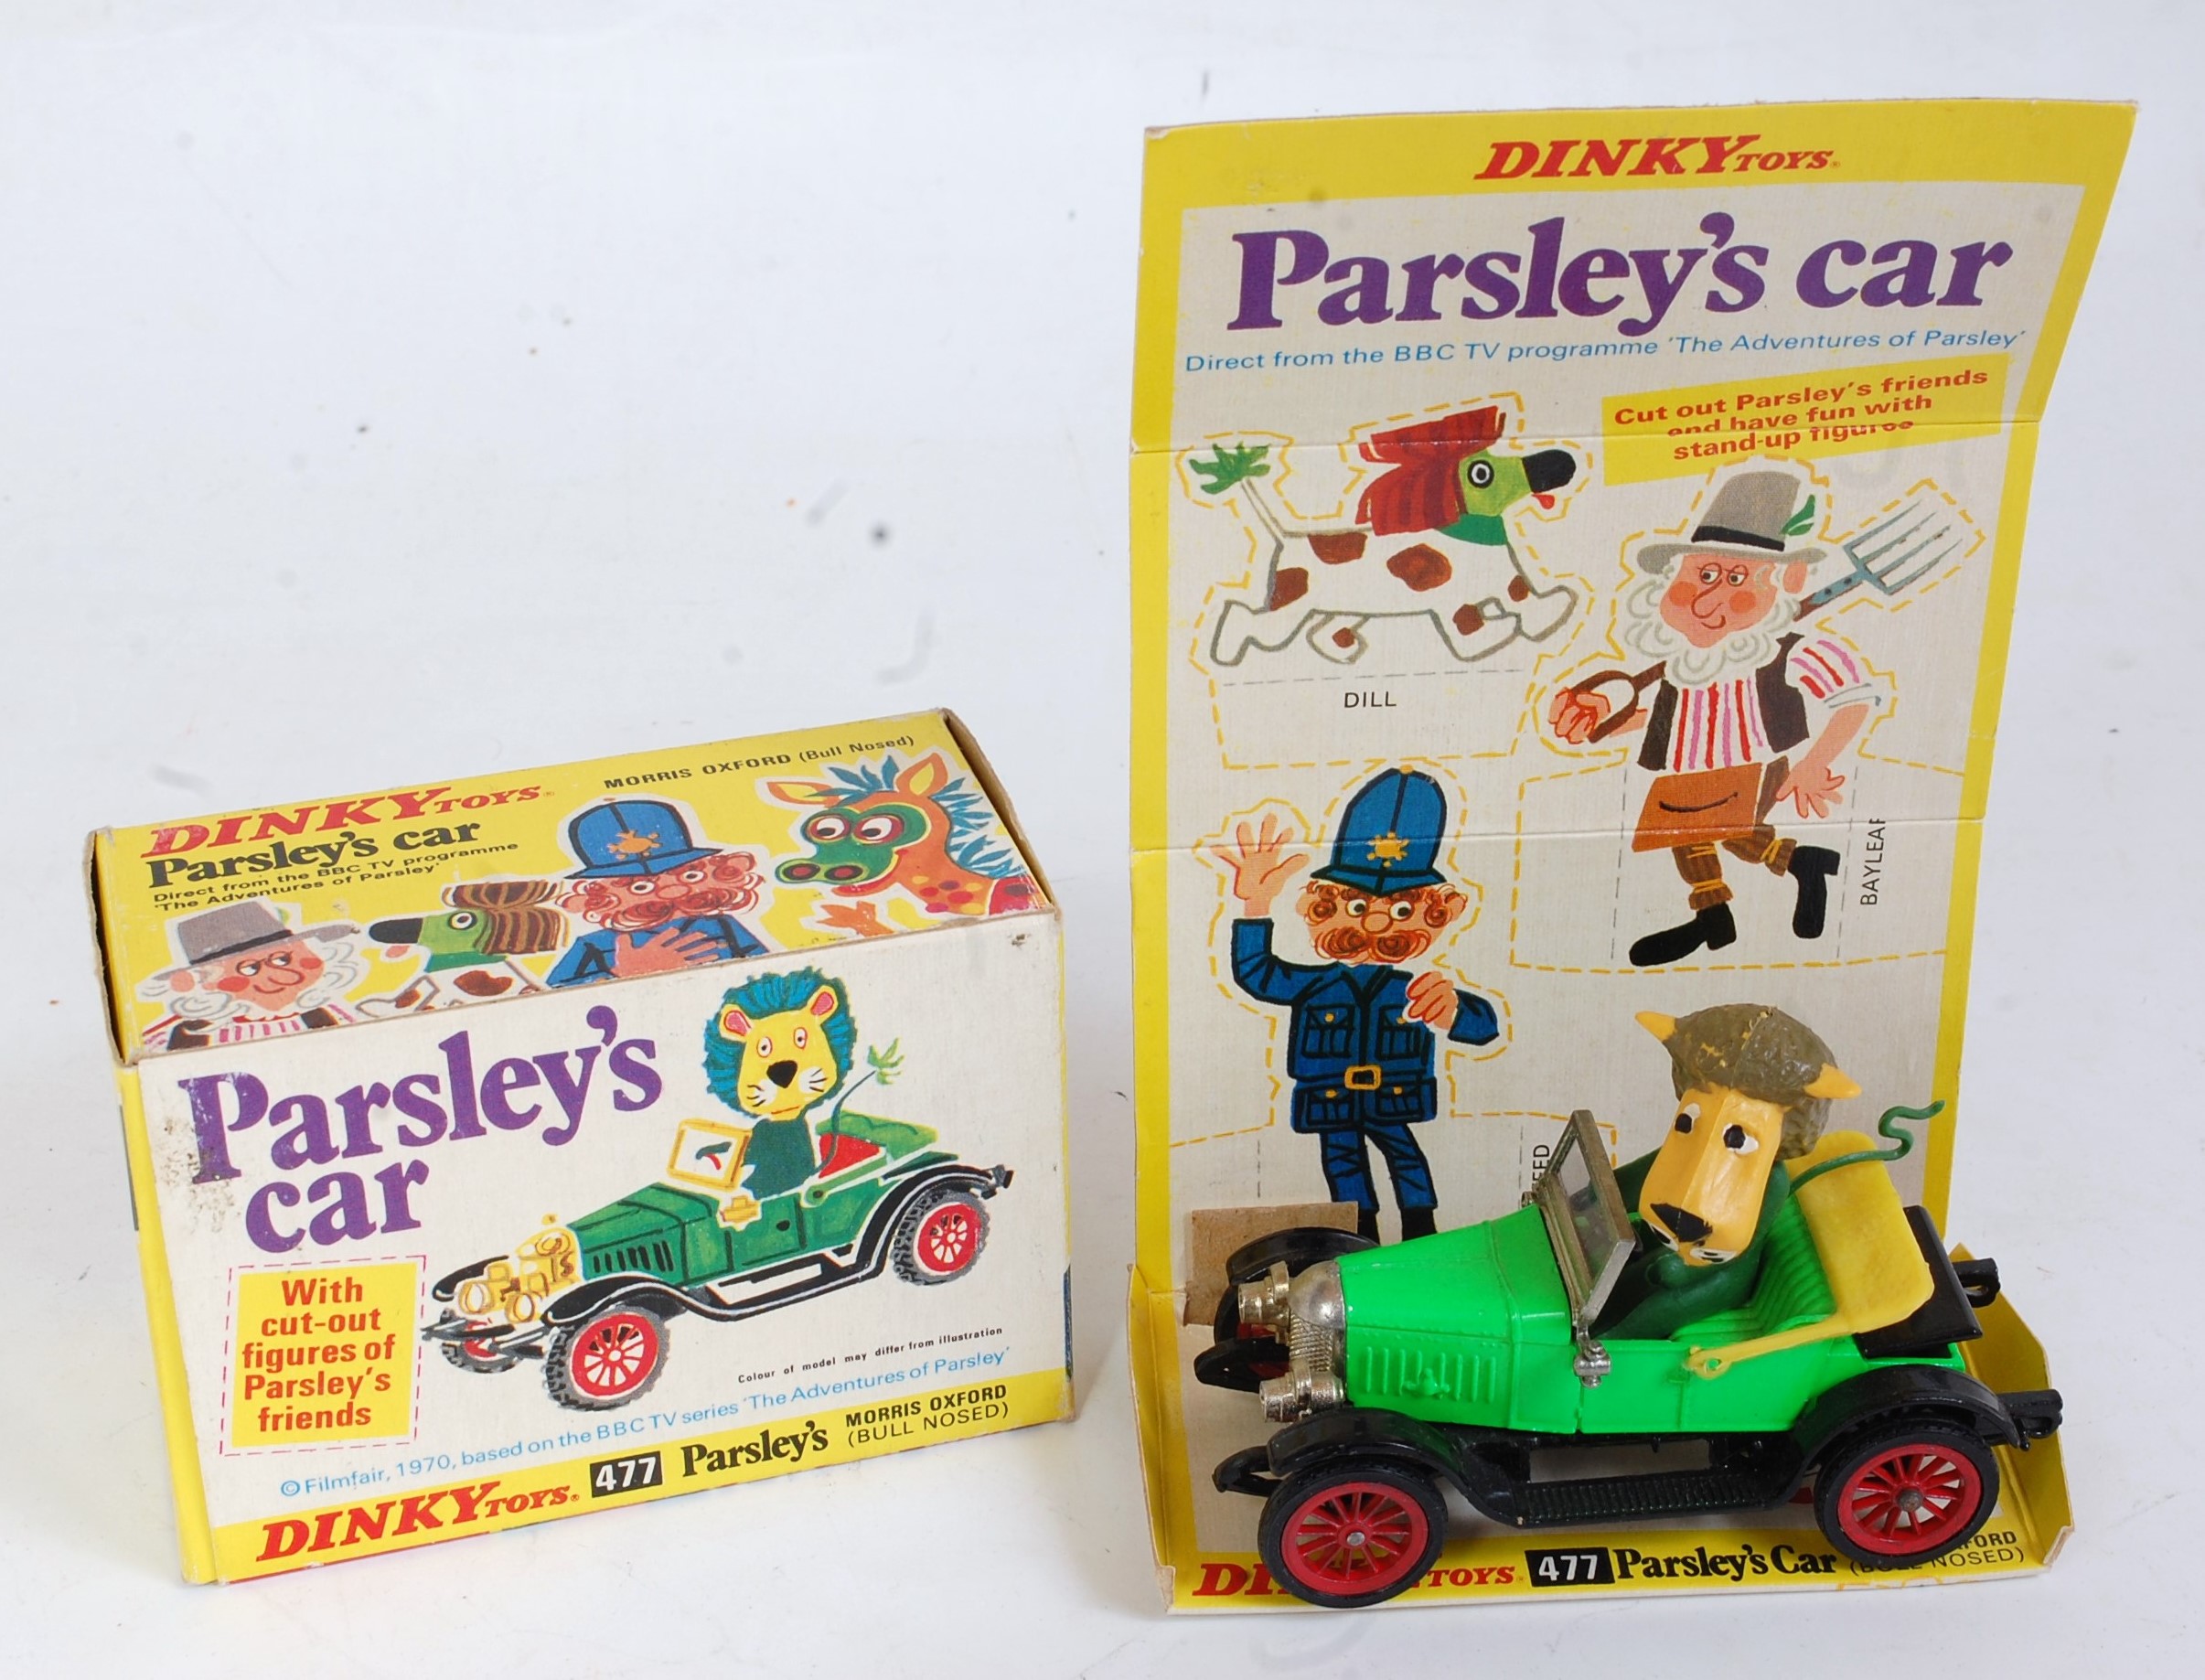 A Dinky Toys No. 477 Parsley's Car comprising of green, black and yellow body with Parsley as the